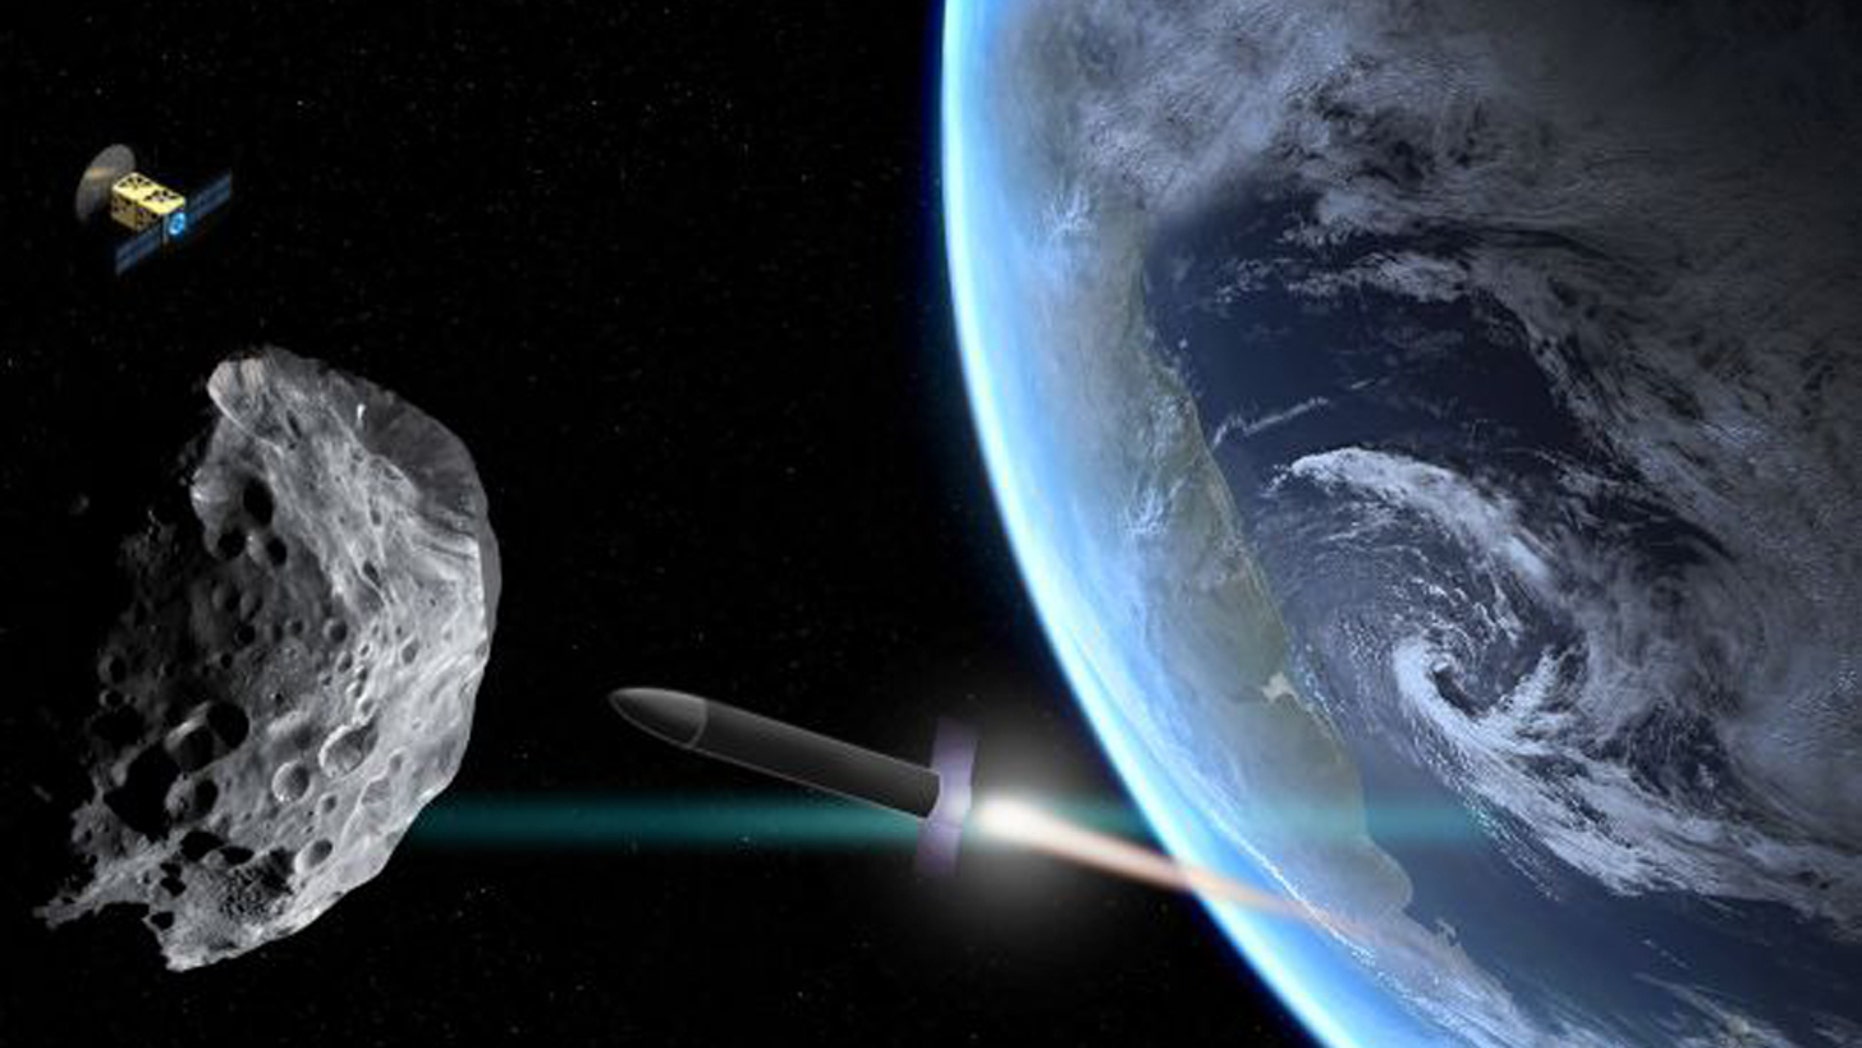 What should we do if a asteroid takes aim at Earth